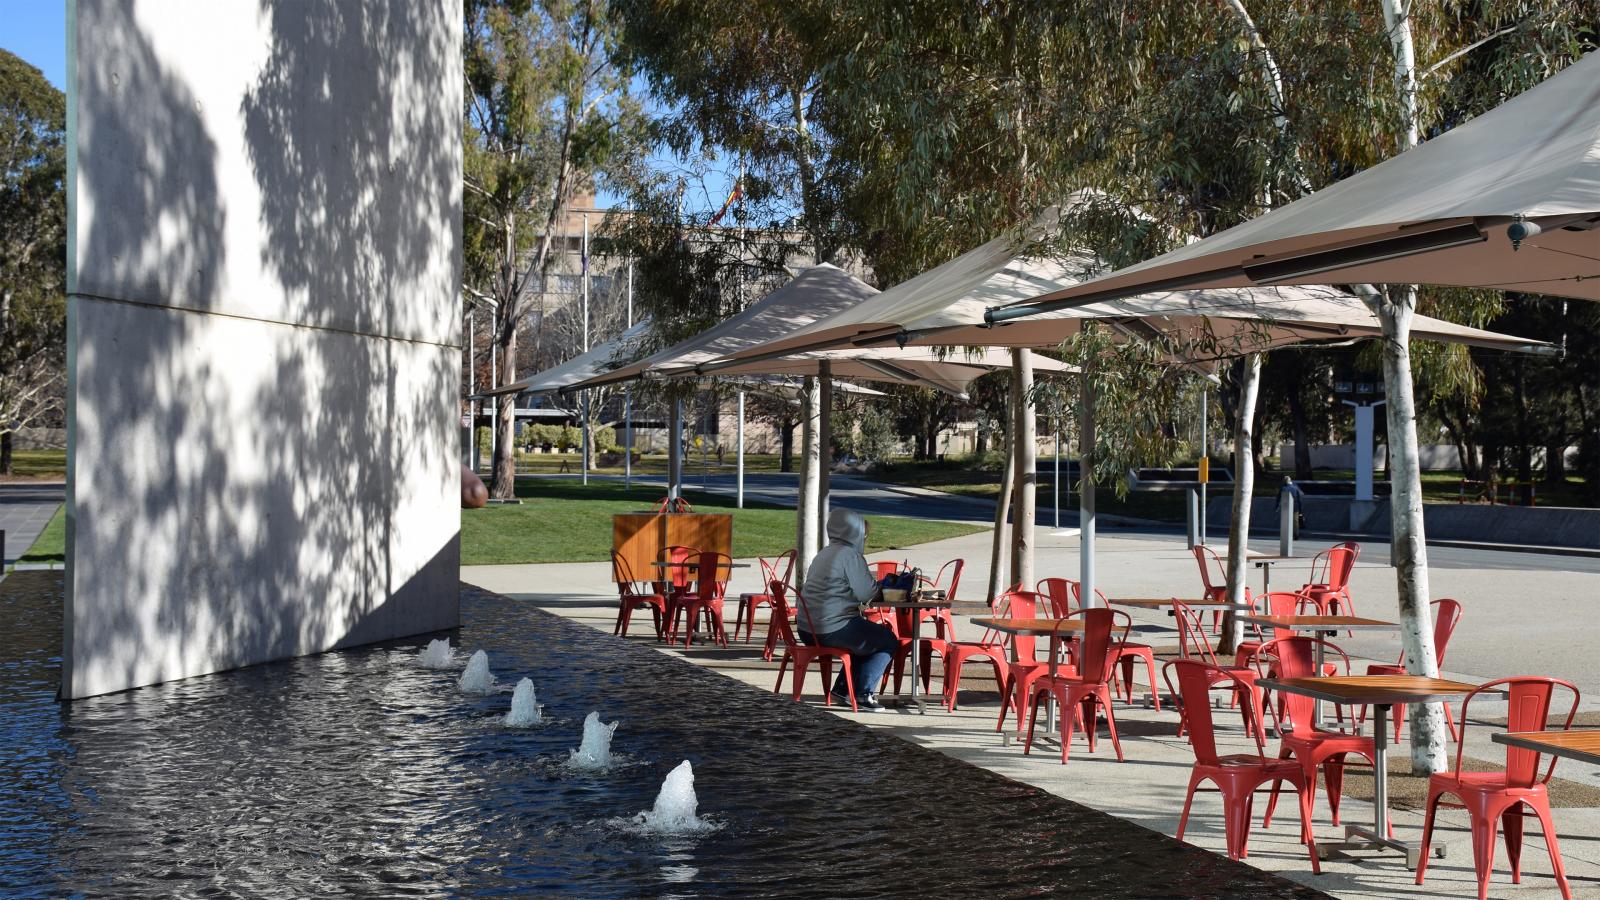 Outdoor café with red chairs and tables, shaded by large umbrellas. A person in a gray hoodie sits alone at a table. The area is adjacent to a fountain with several water jets and surrounded by trees from the Australian Garden at the NGA. Some buildings are visible in the background.
